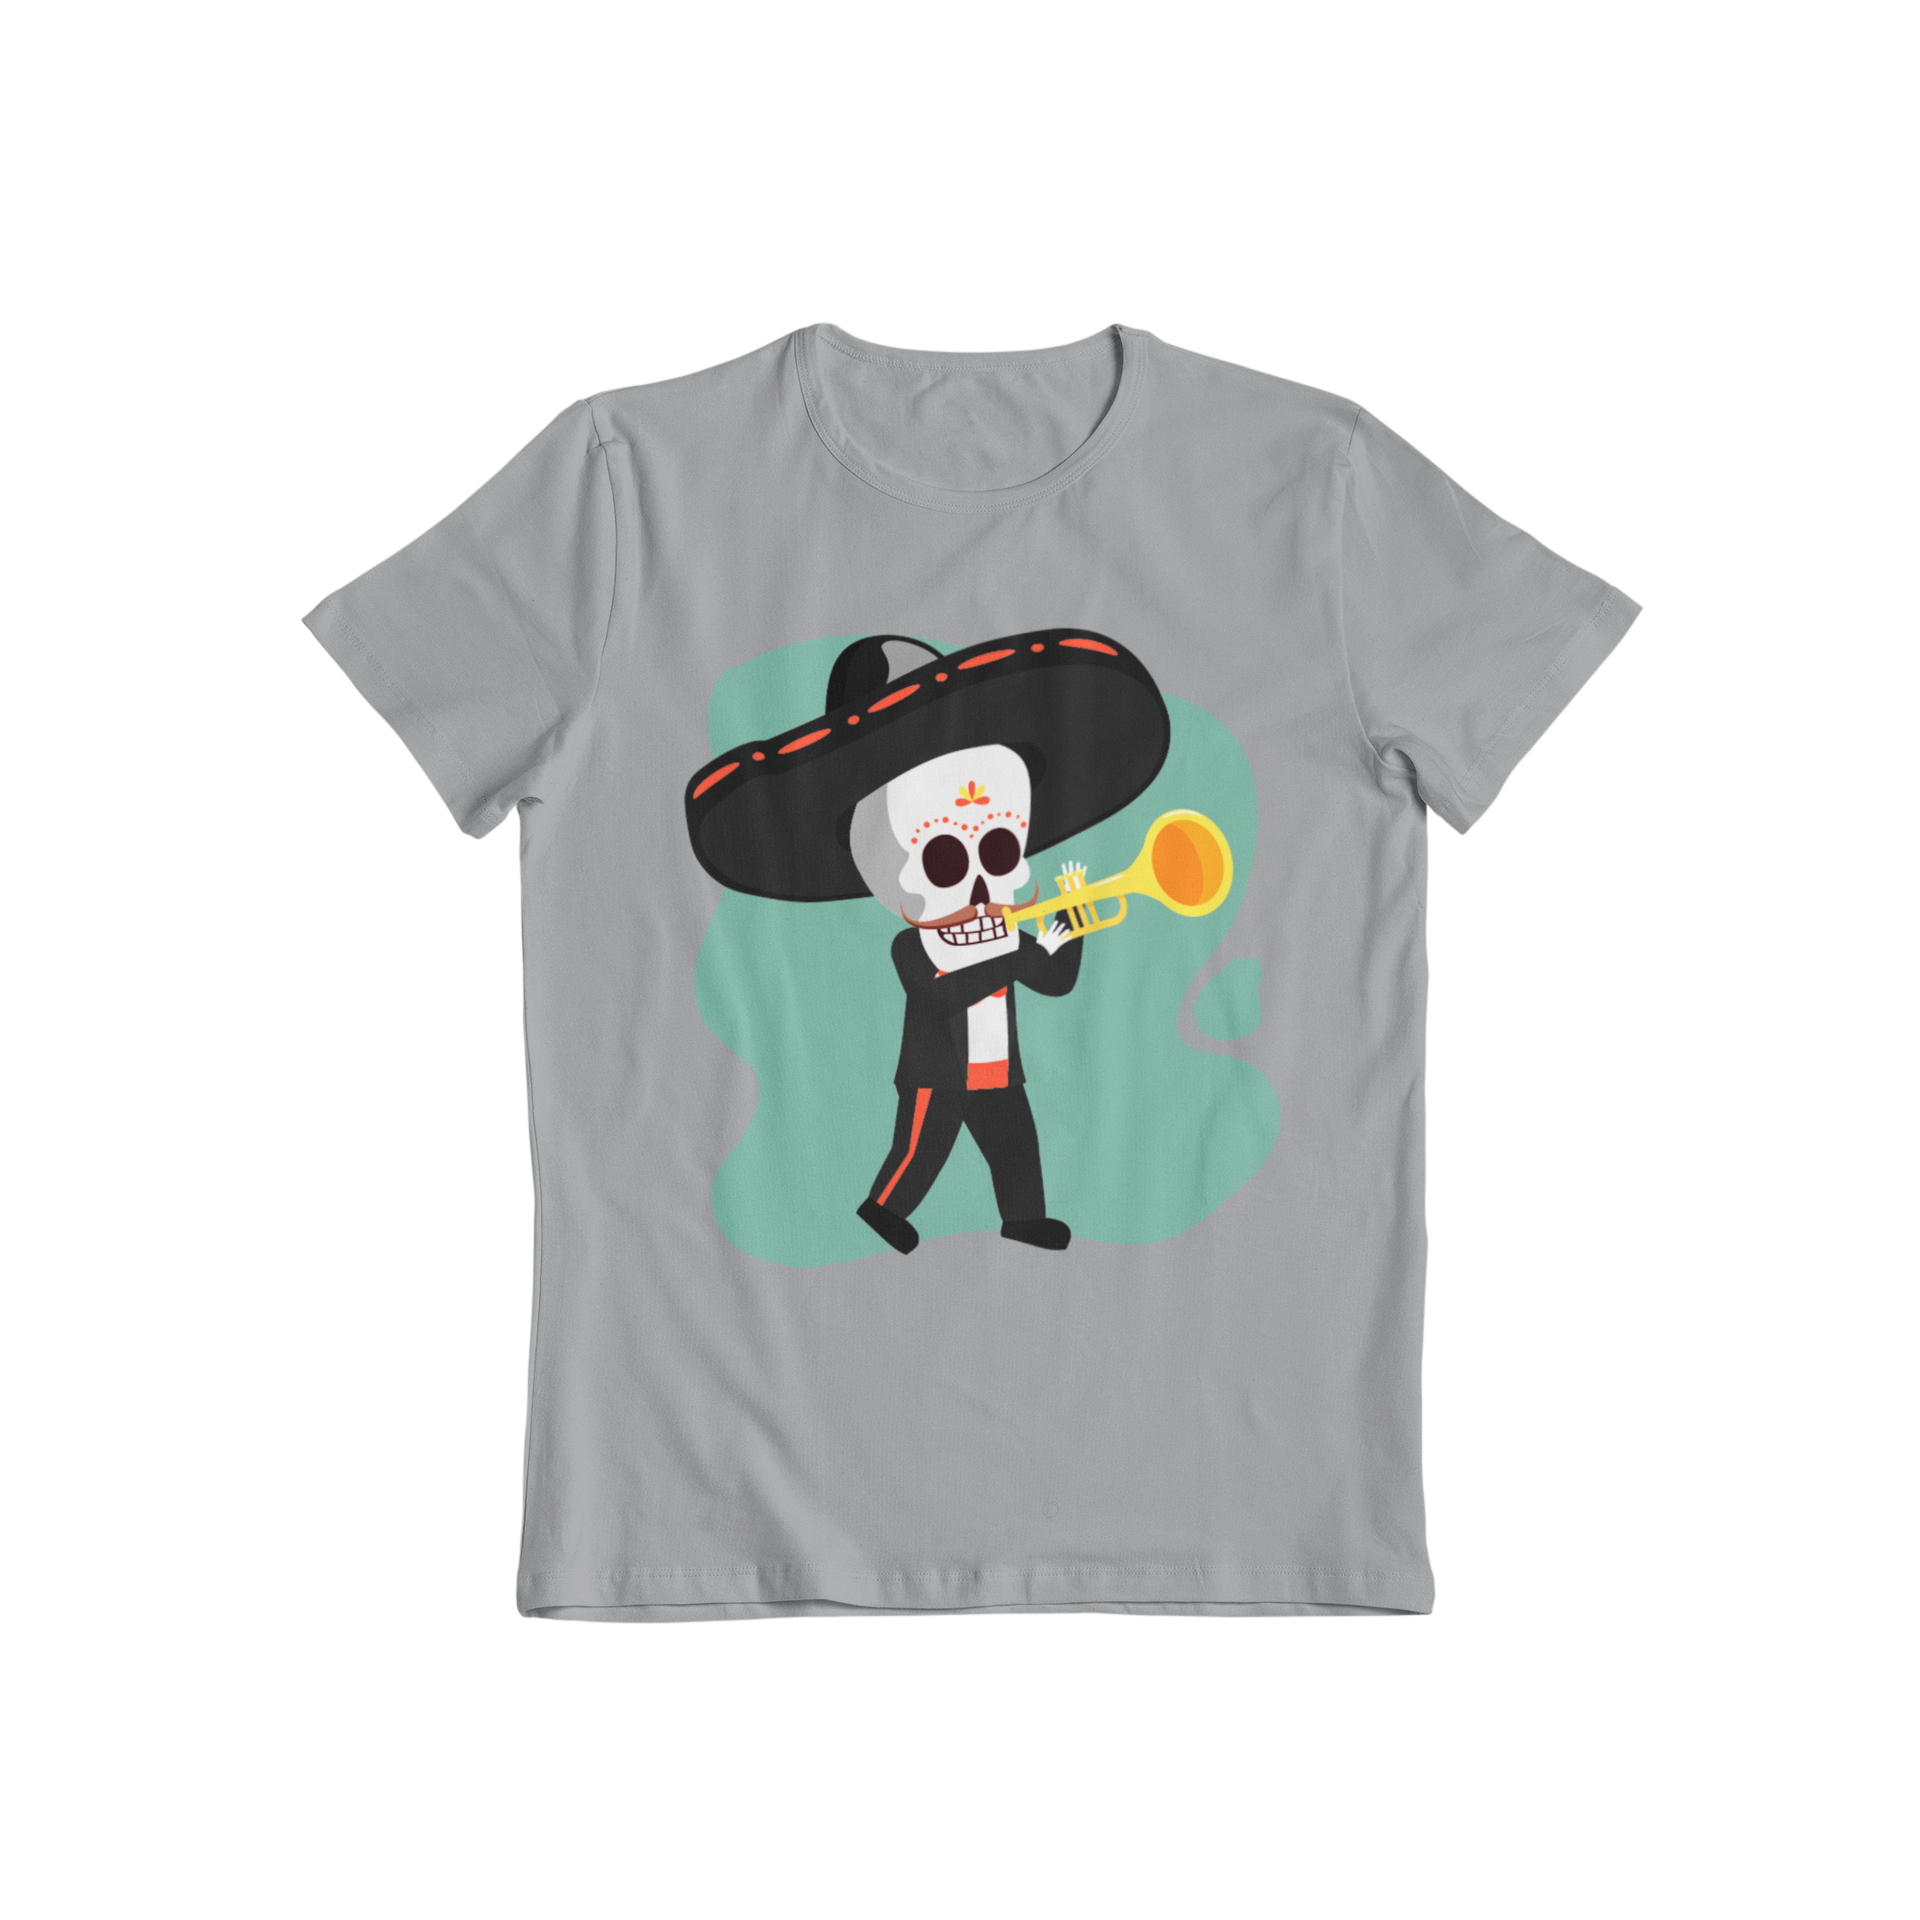 Get ready for summer with Teevolution! Our Skeleton Mariachi Trumpeter graphic tee is bold and fun, perfect for any summer occasion. Stand out from the crowd and add some flair to your wardrobe with Teevolution.